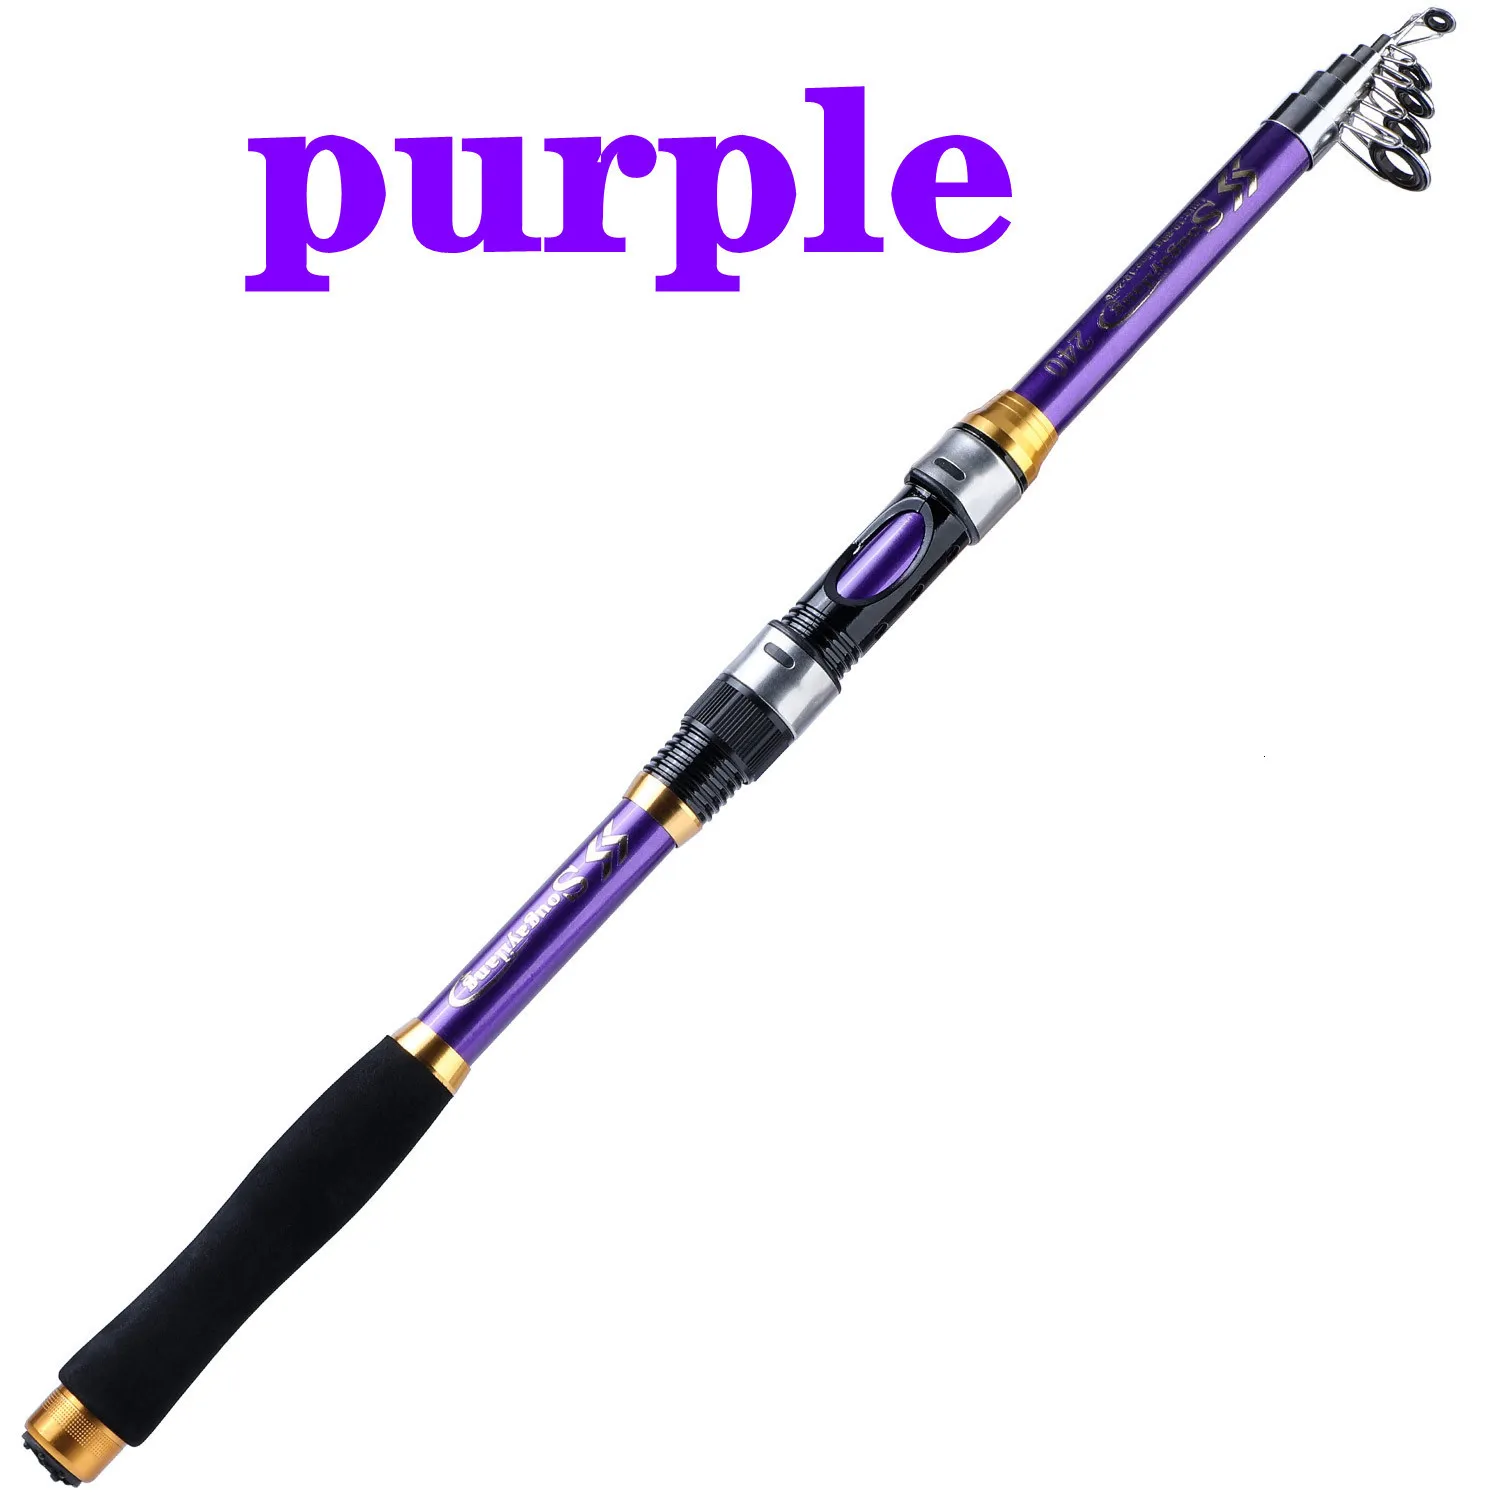 Sougayilang Telescopic Sea Short Boat Fishing Rods Ultra Light Spinning  Tackle For Pesca Fishing, 1.8m To 3.6m Lengths From Yao09, $9.12